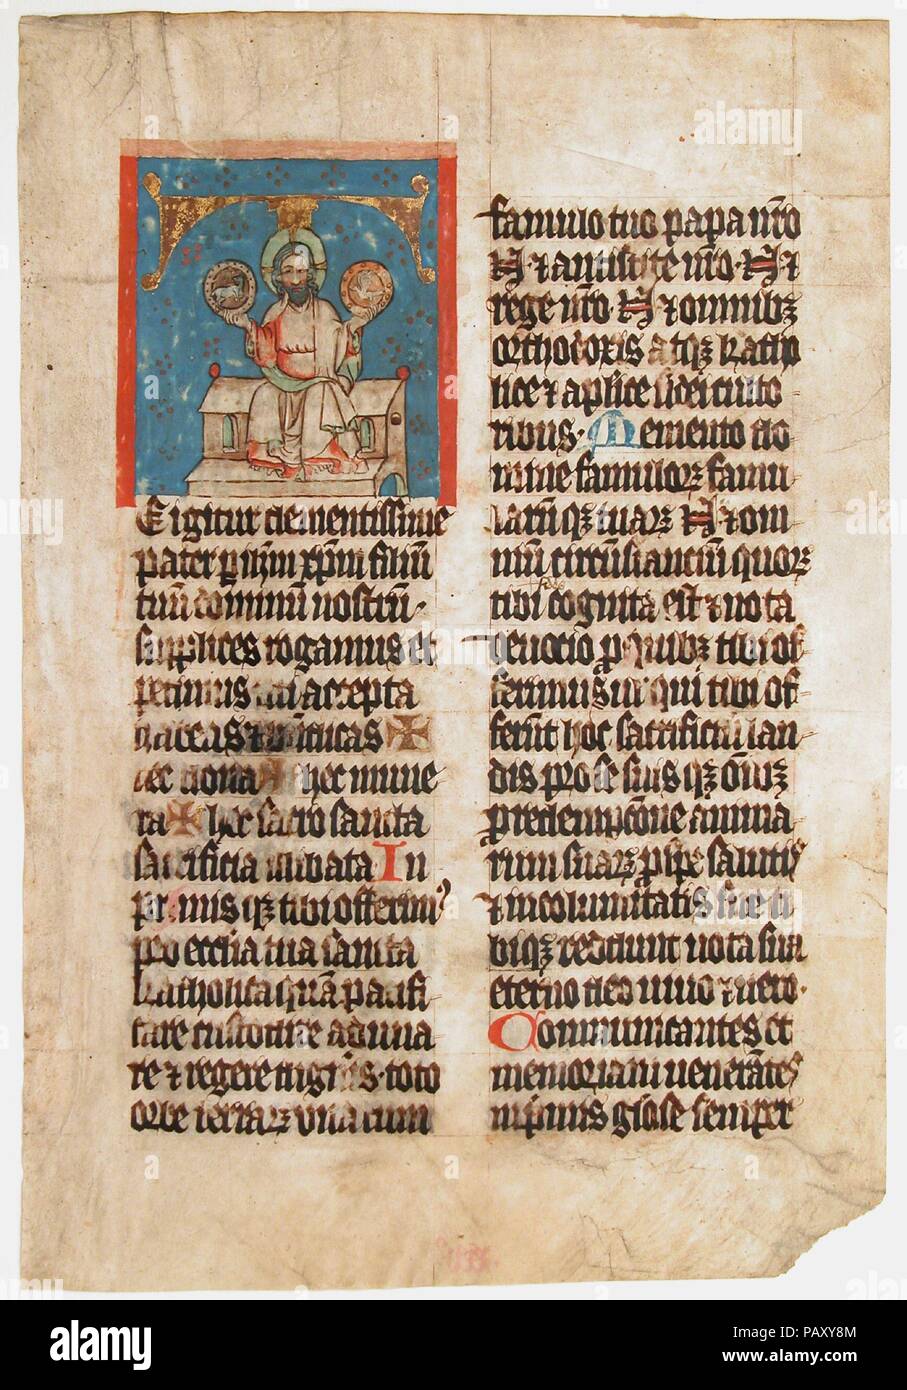 Manuscript Leaf with the Holy Trinity in an Initial T, from a Missal. Culture: South German. Dimensions: Overall: 13 1/16 x 8 7/8 in. (33.1 x 22.6 cm)  Illumination: 3 3/4 x 3 7/16 in. (9.5 x 8.8 cm)  Study mat size: 17 15/16 x 14 in. (45.6 x 35.5 cm). Date: ca. 1390. Museum: Metropolitan Museum of Art, New York, USA. Stock Photo